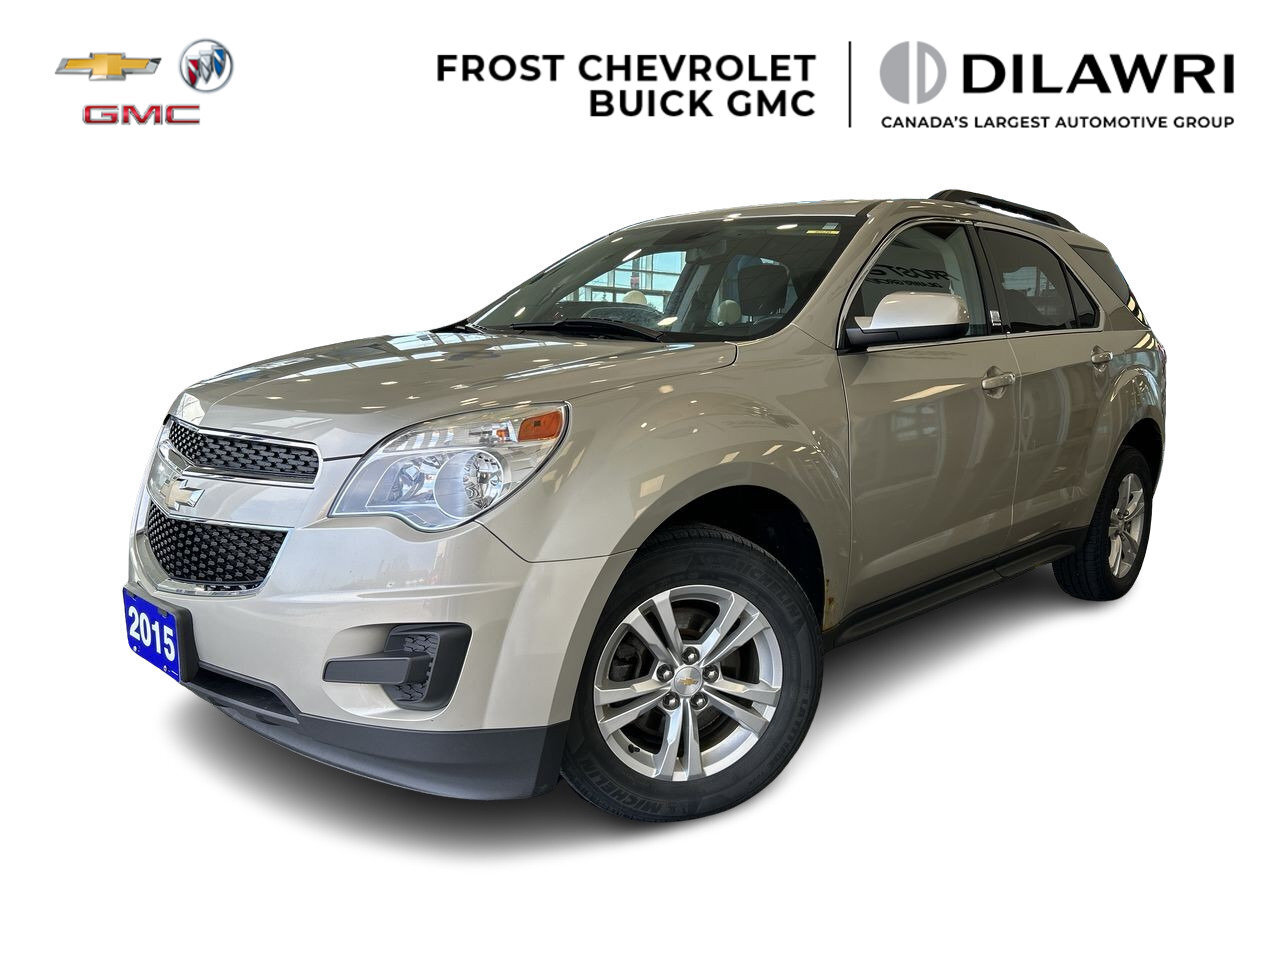 2015 Chevrolet Equinox AWD 1LT Heated Front Seats I Remote Start I Cruise